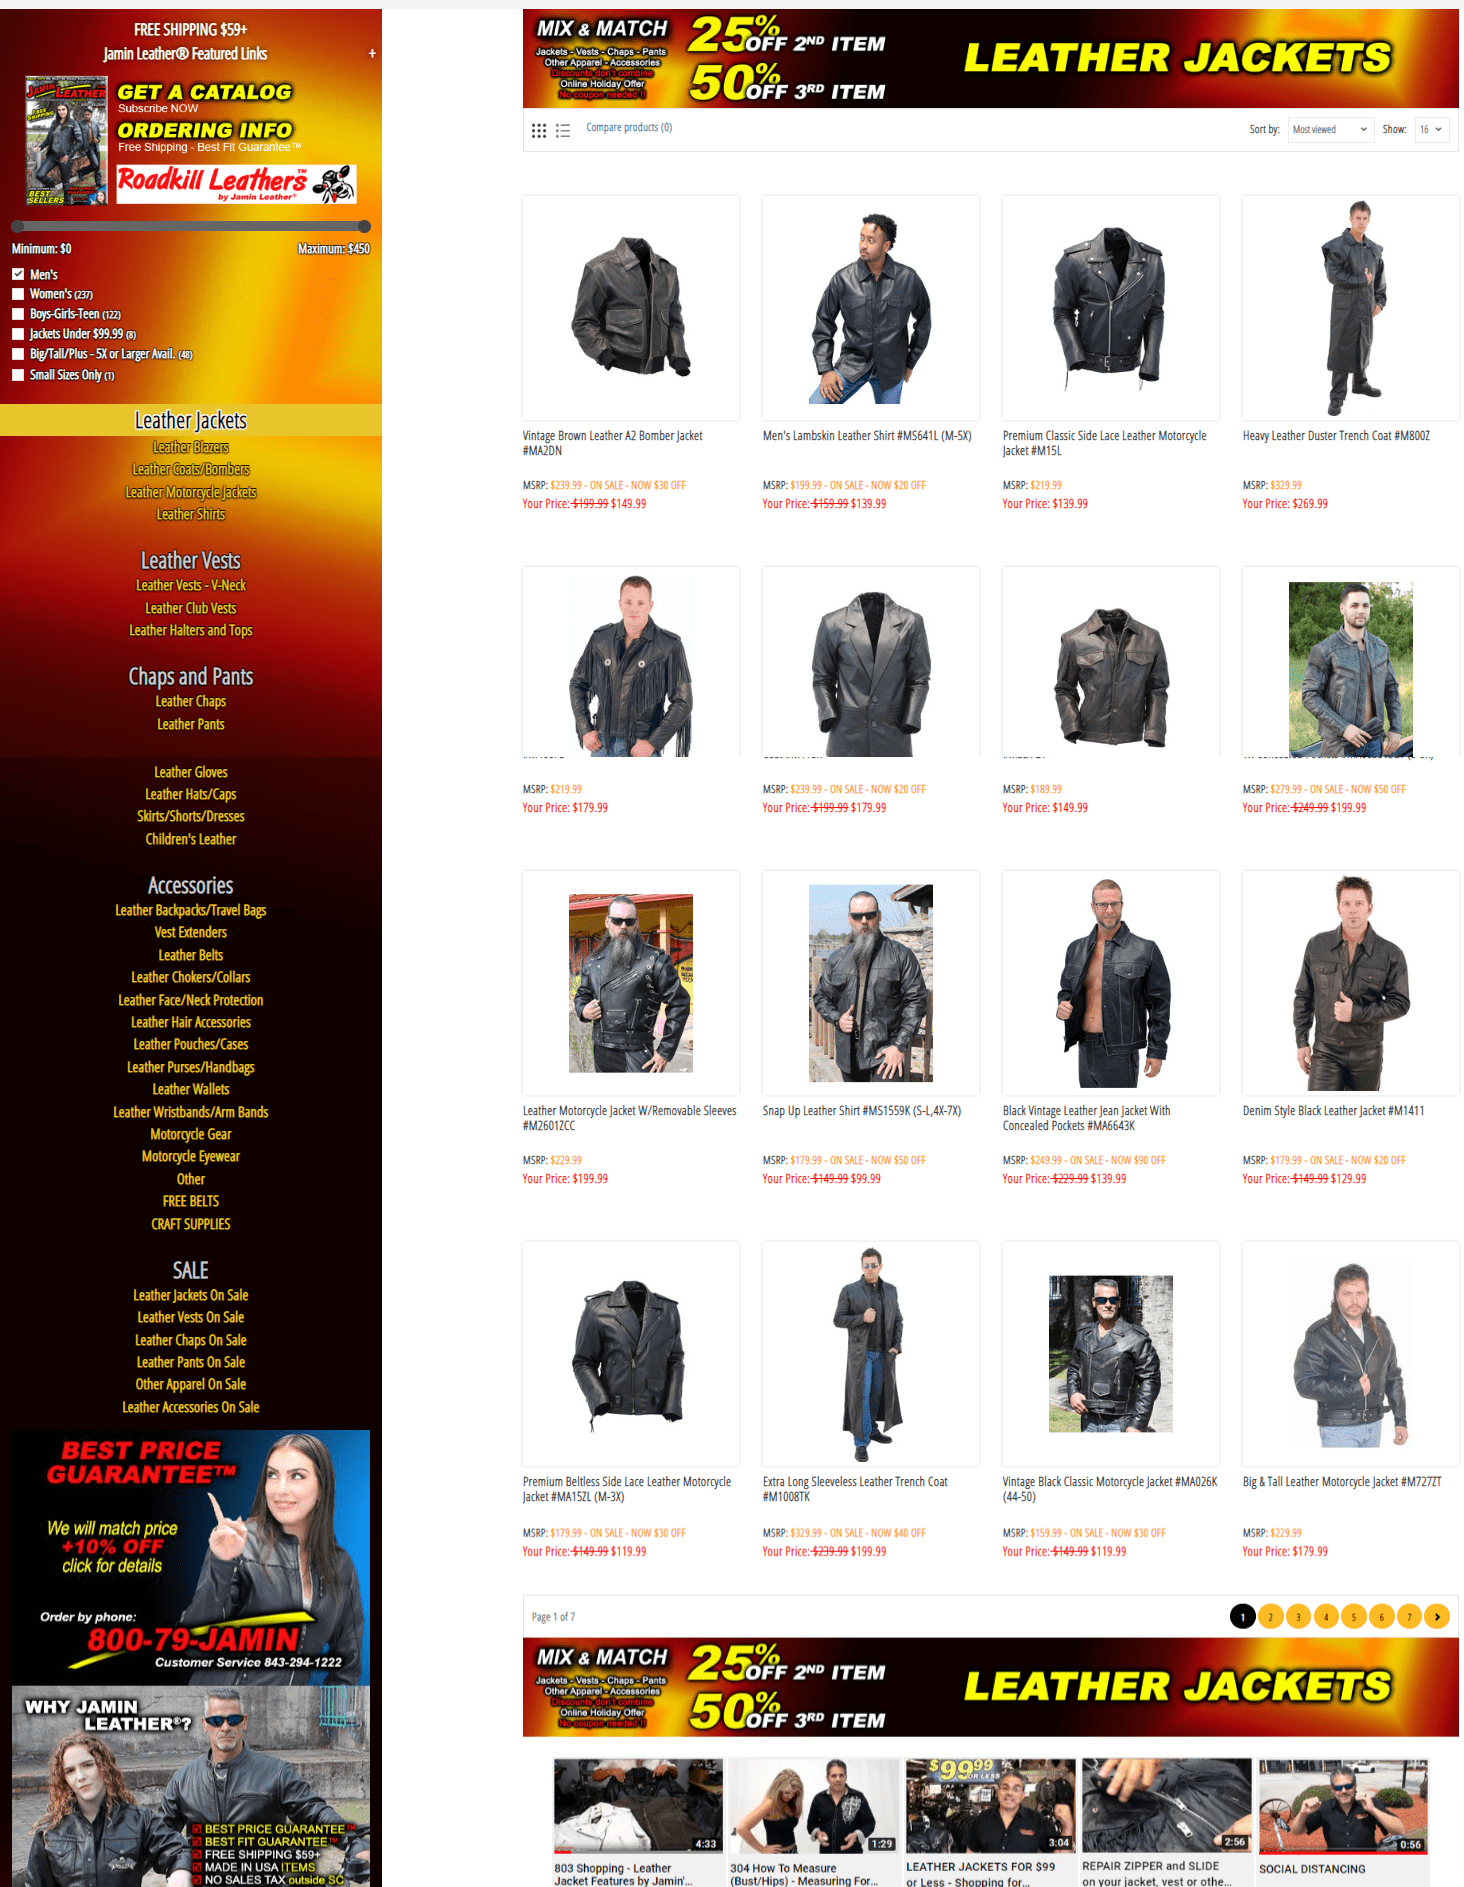 Men's Leather Jackets - Jamin Leather